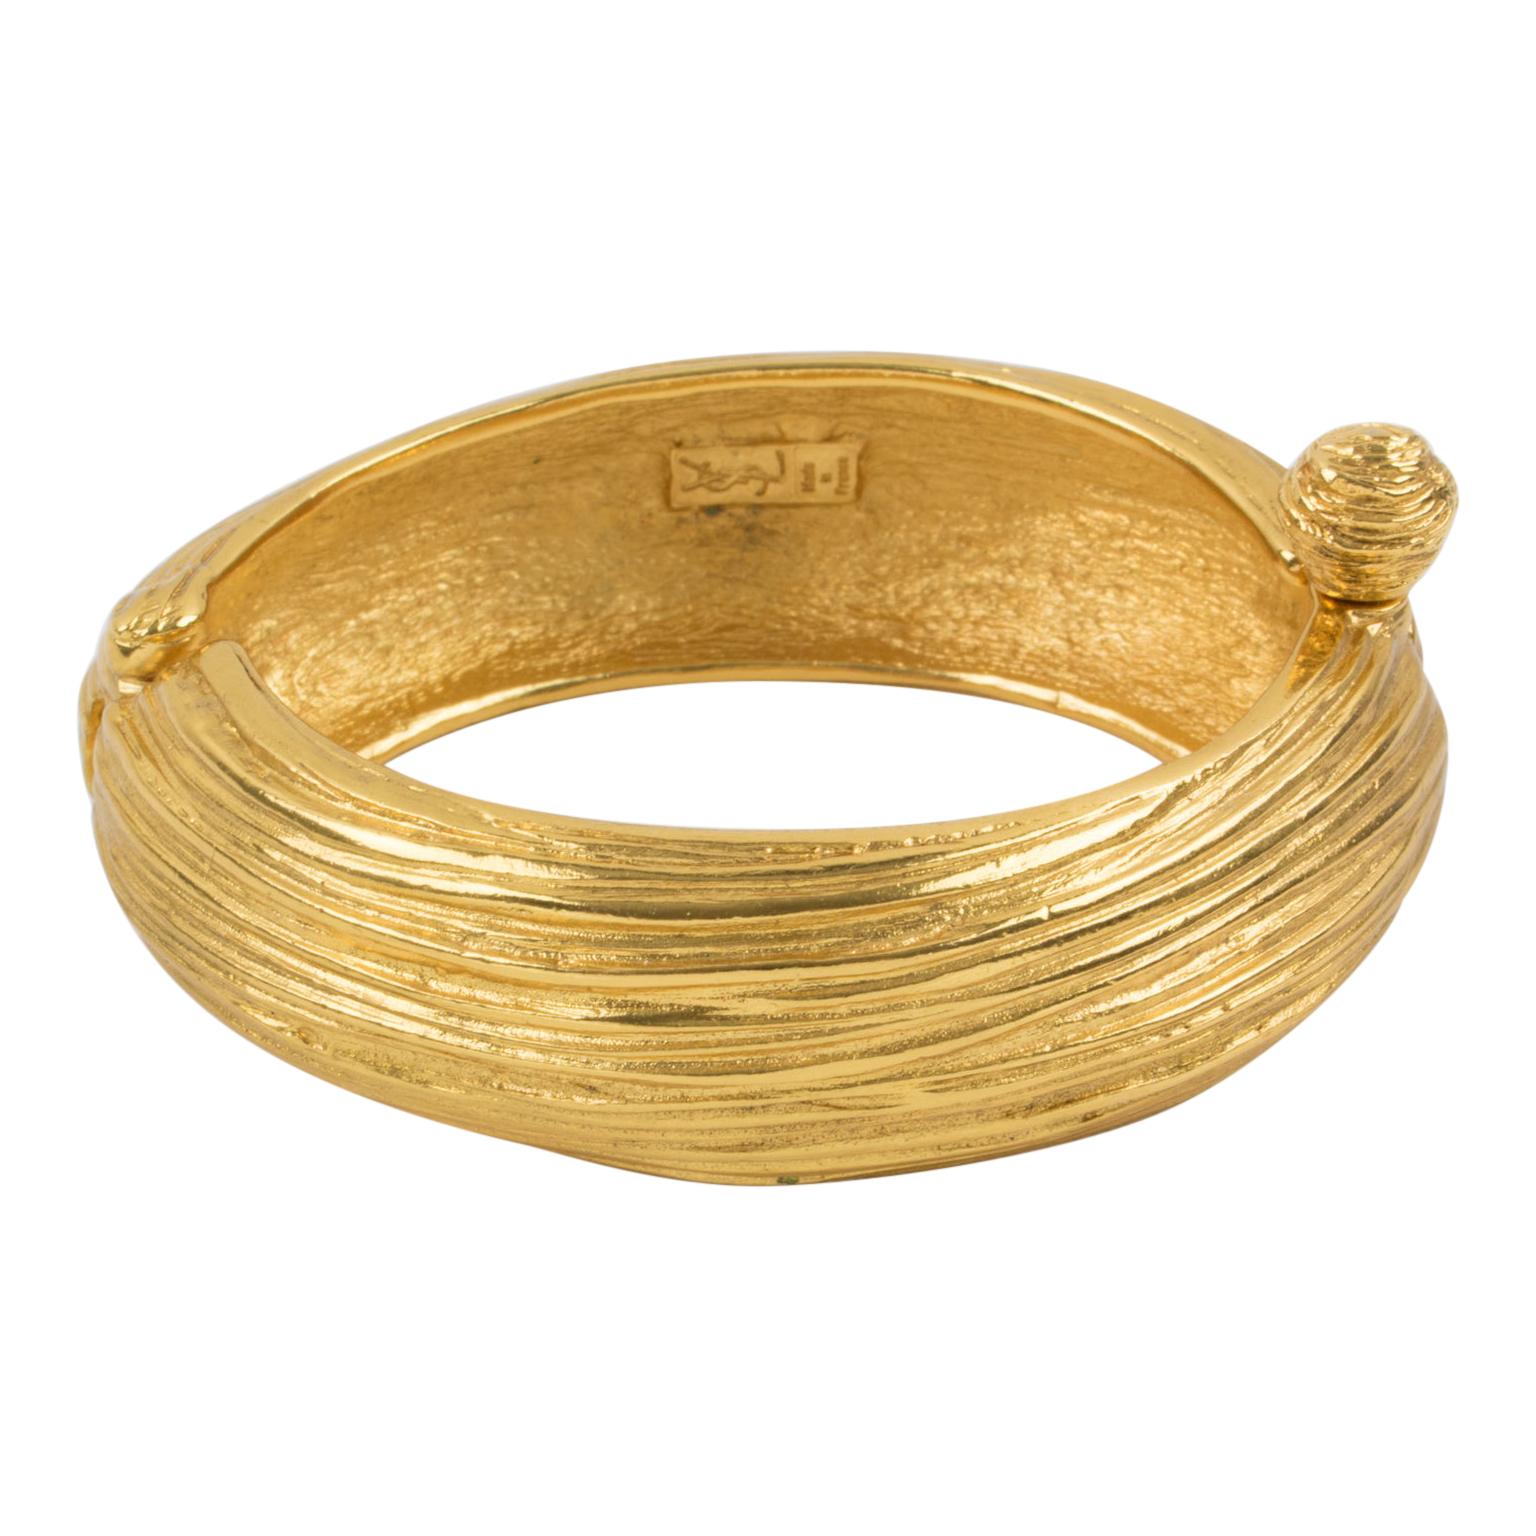 Yves Saint Laurent YSL Paris designed this couture clamper bracelet. The piece features a massive oval shape in gilded metal with all carving and striped texture patterns. The bracelet has a hinge and opens with a push/pull stick lock closure. The